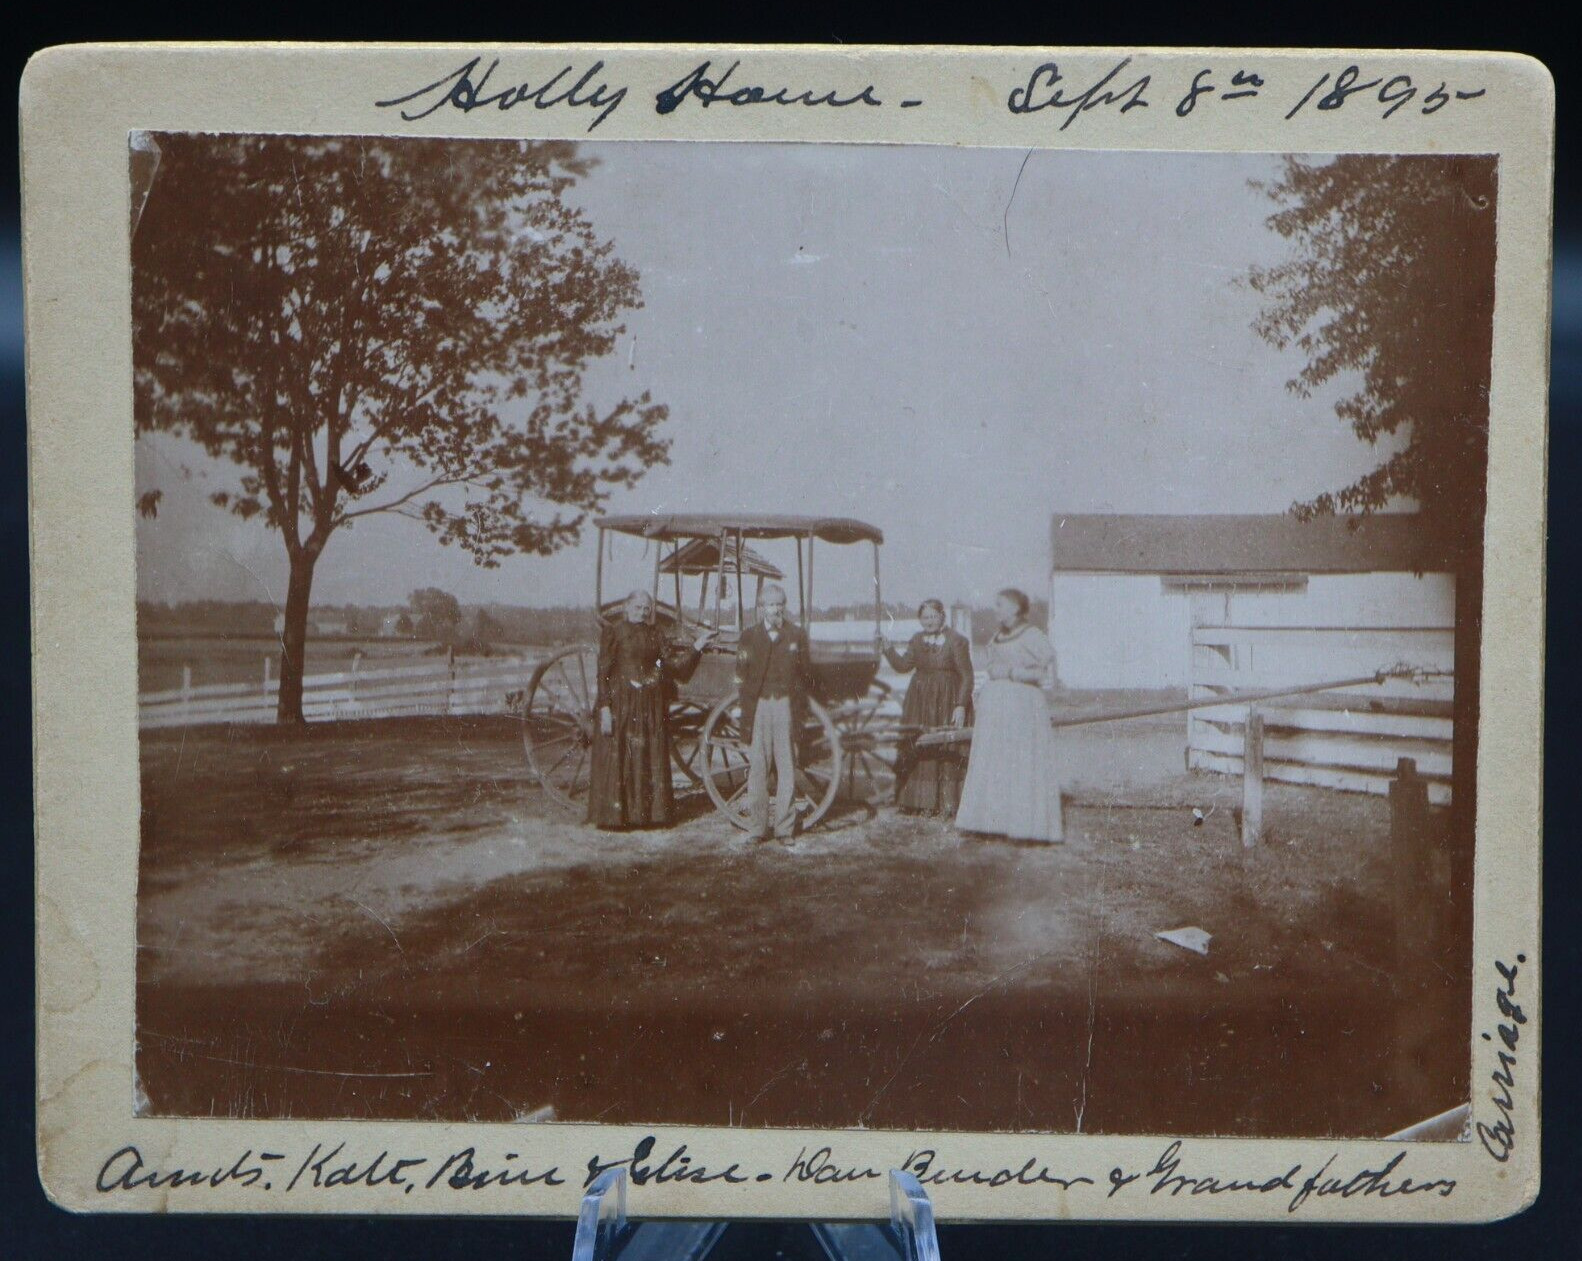 Antique 4x5 Cabinet Photo of 1895 Family on Farm with Horse Carriage Buggy